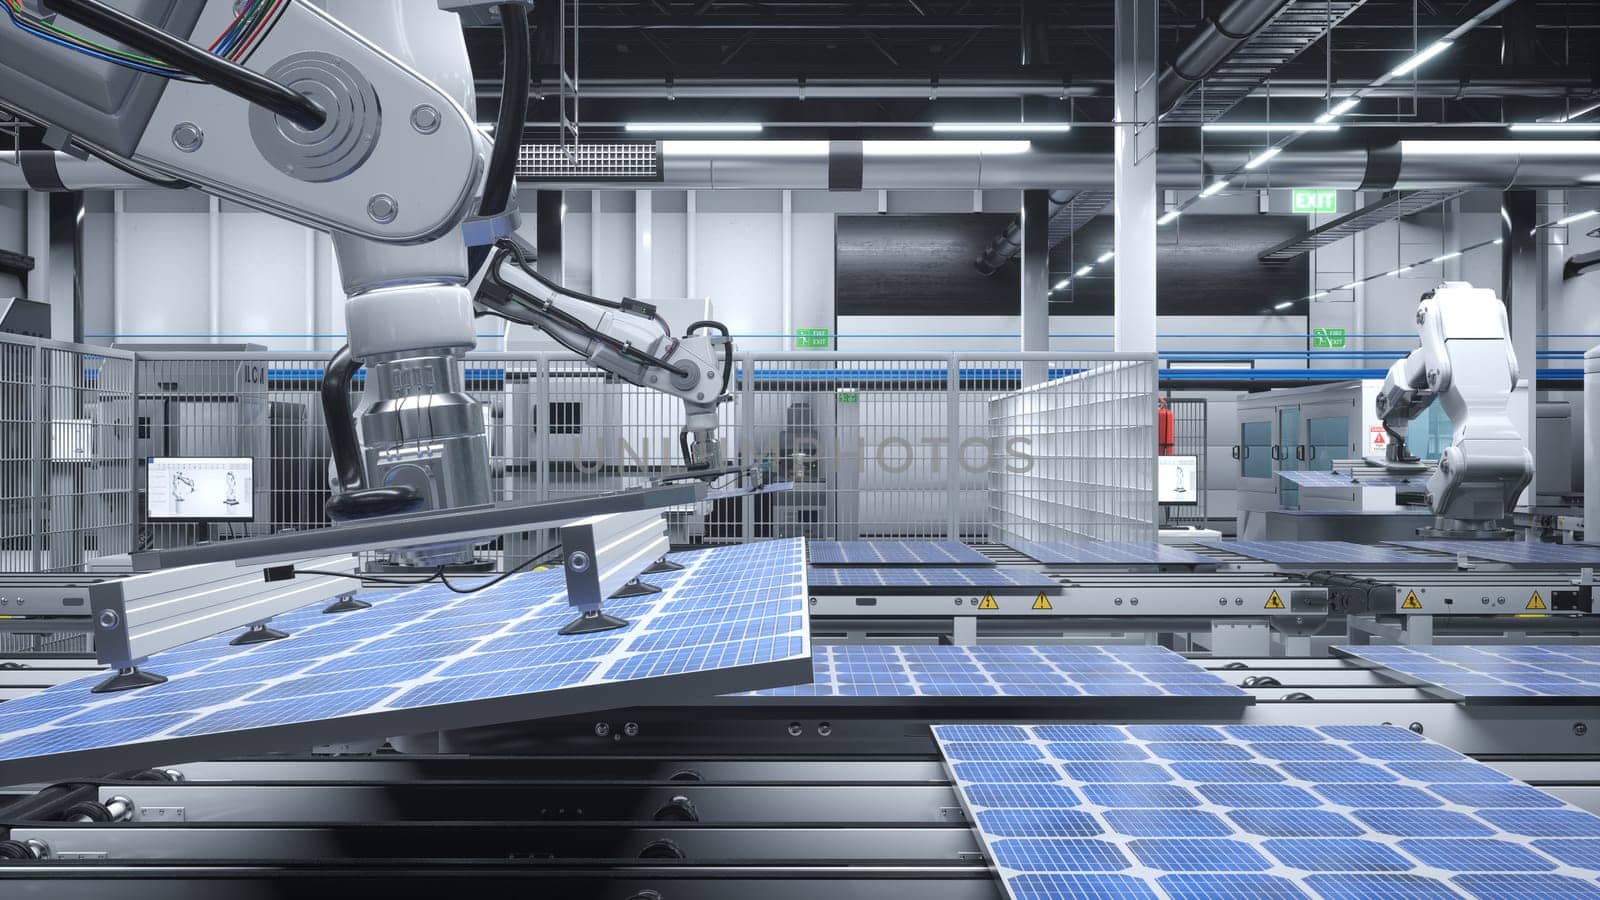 Industrial robot arms placing solar panels on large production lines in modern green energy factory. PV models being assembled on conveyor belts inside manufacturing facility, 3D render